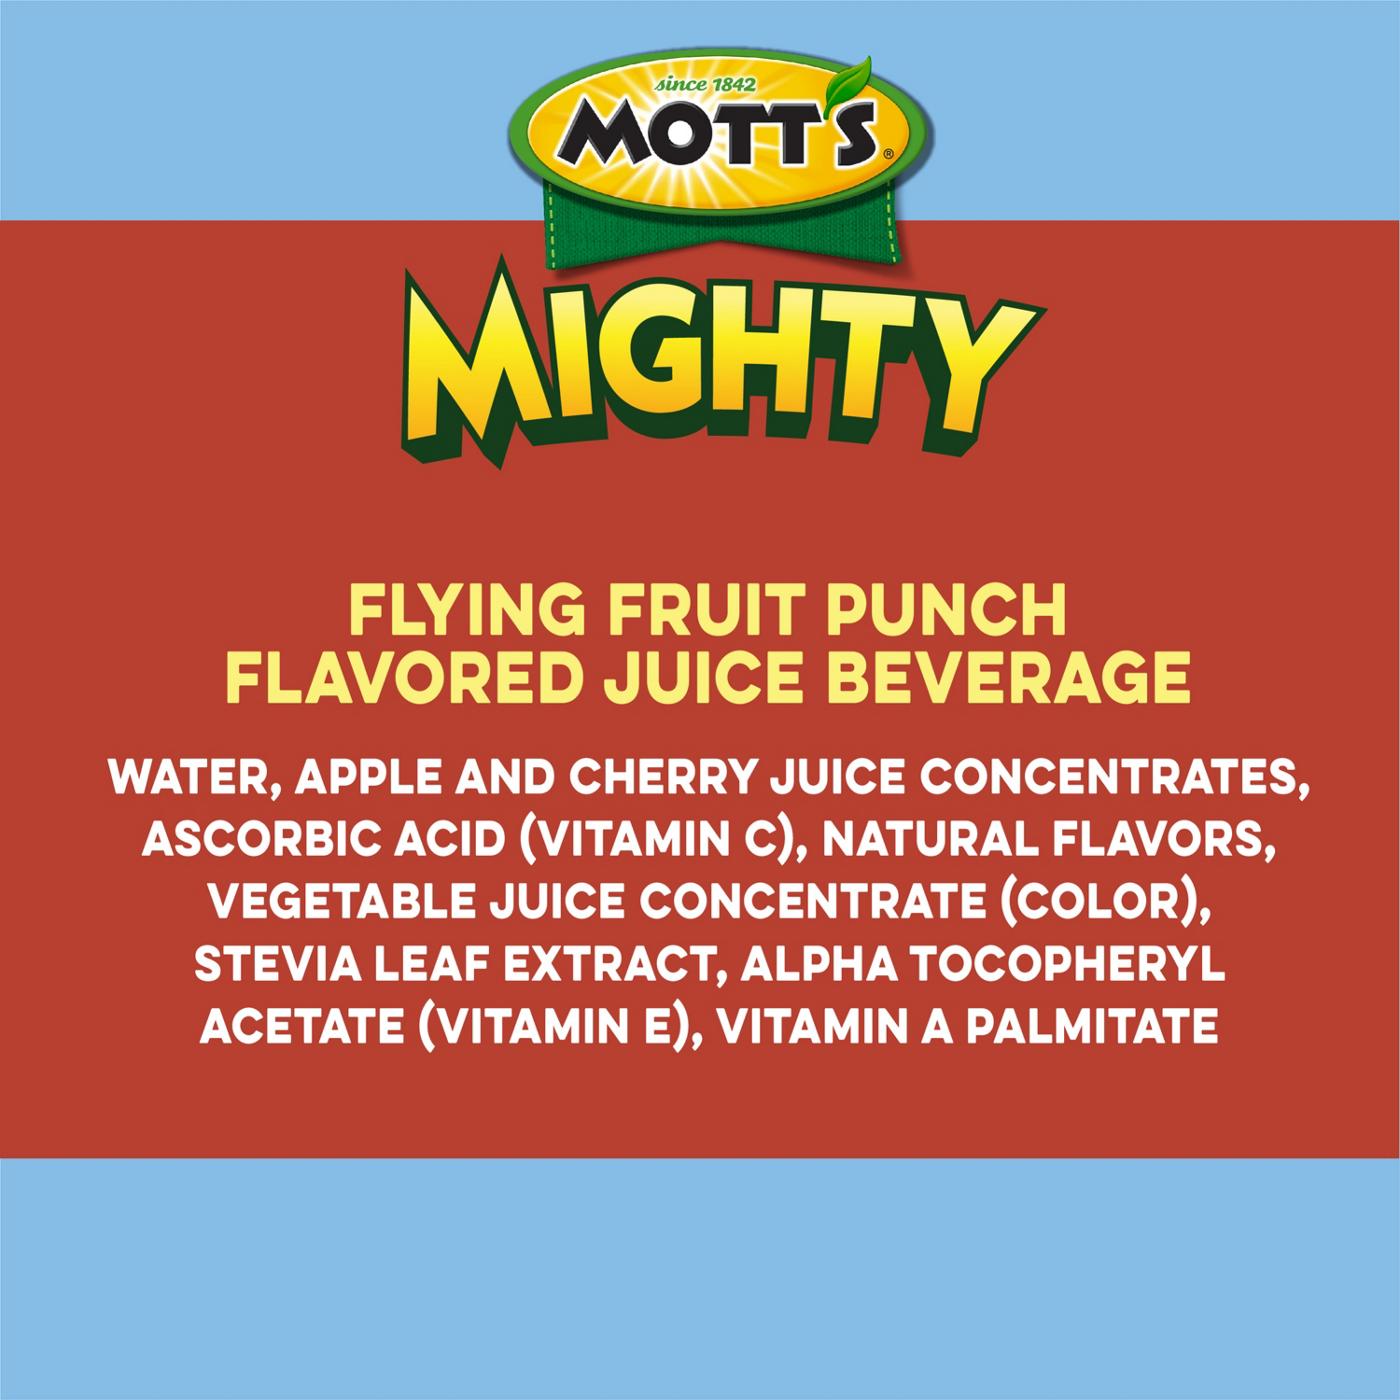 Mott's Mighty Flying Fruit Punch Juice; image 5 of 5